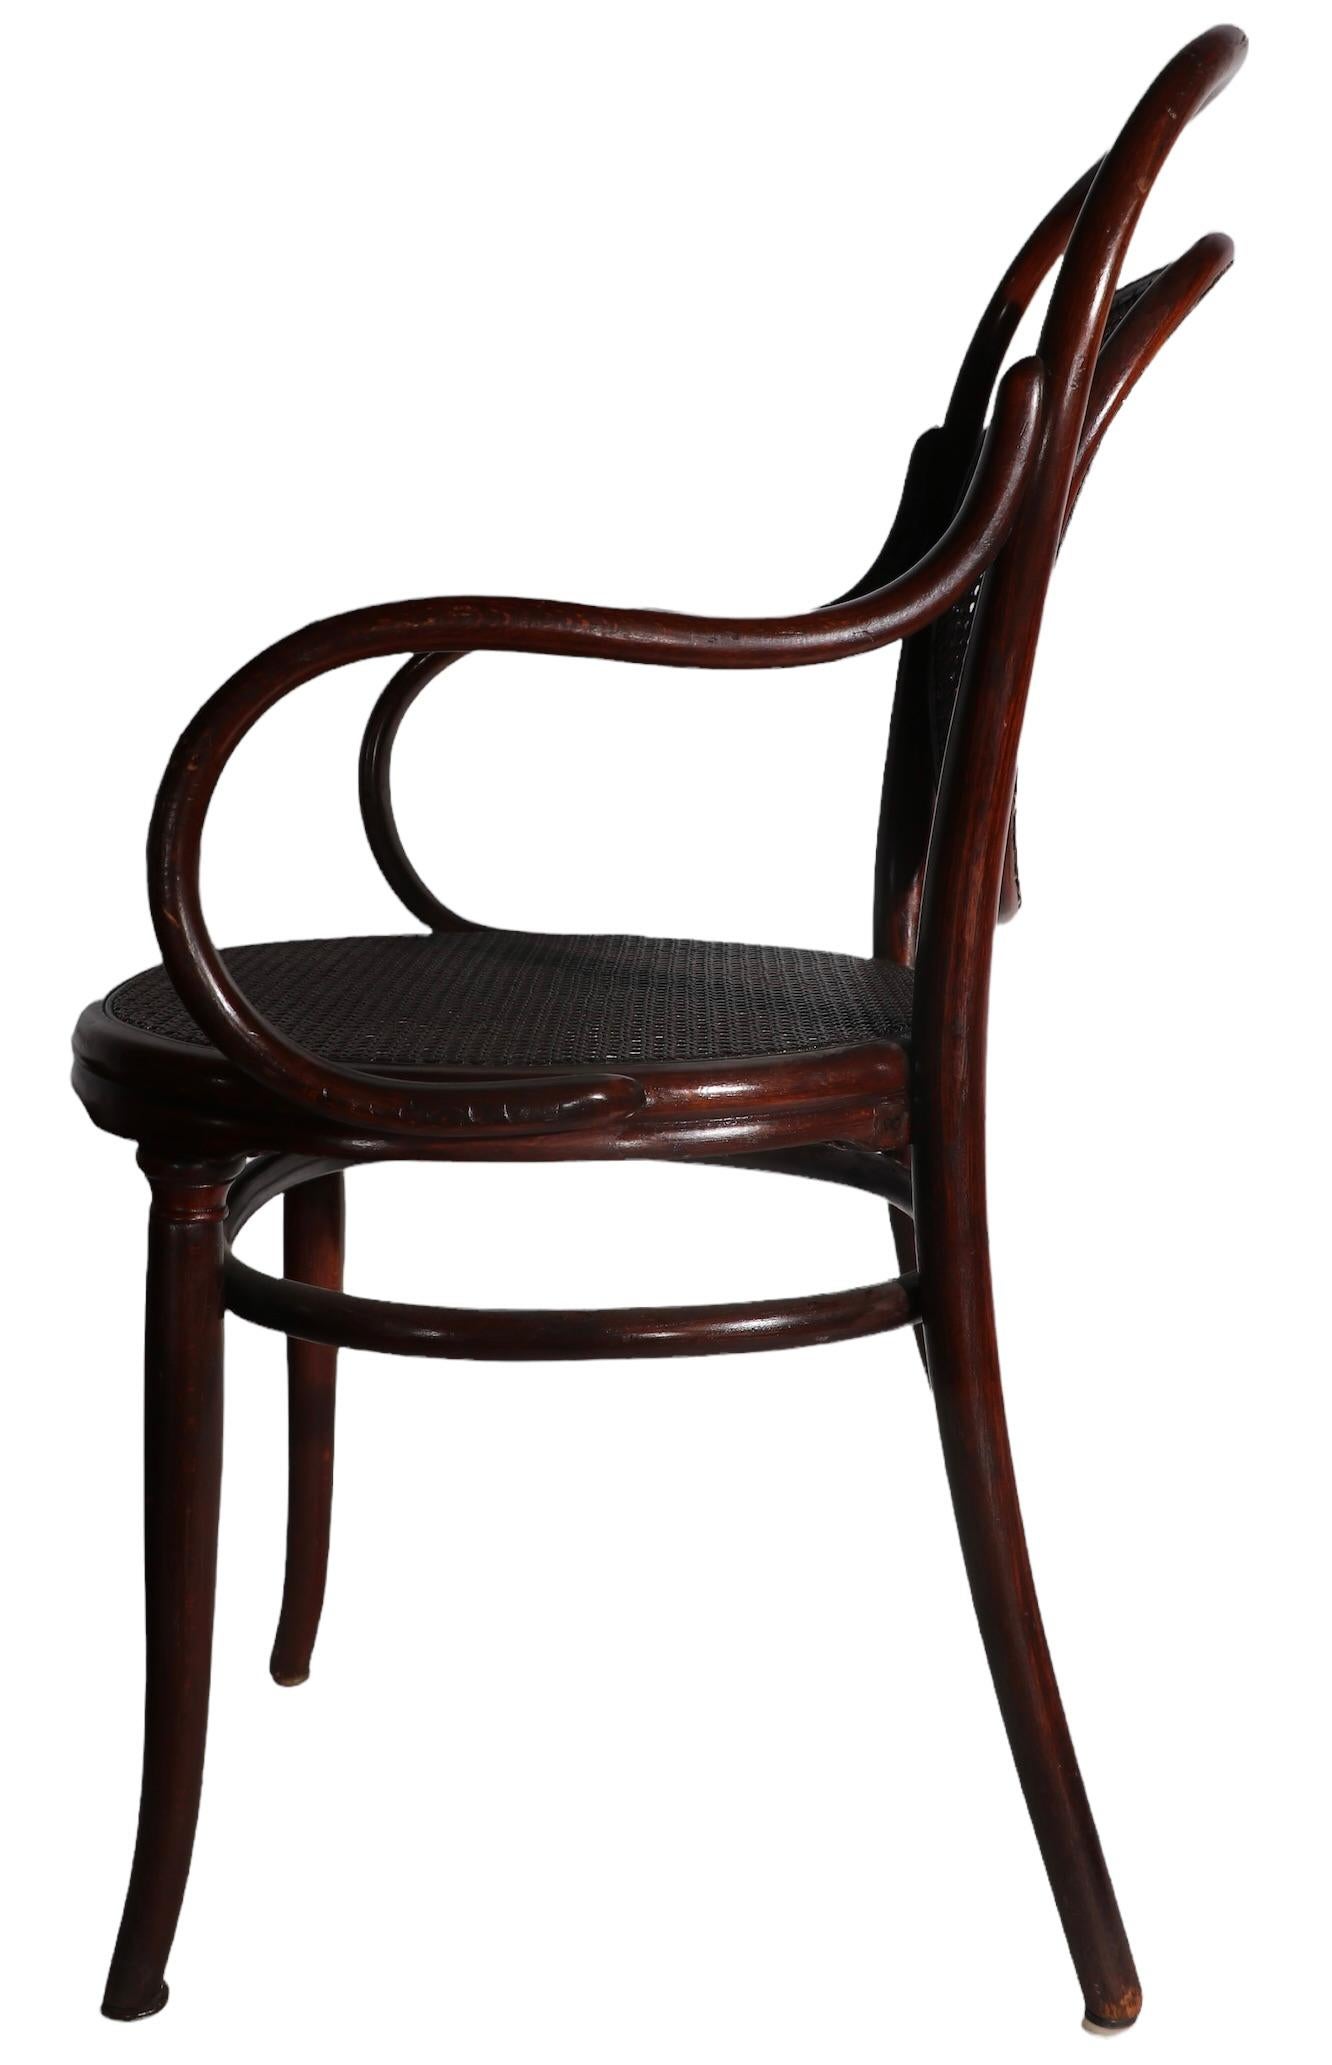 Vienna Secessionist Bentwood Arm Chair Att. to J & J Kohn in the Style of Thonet 1